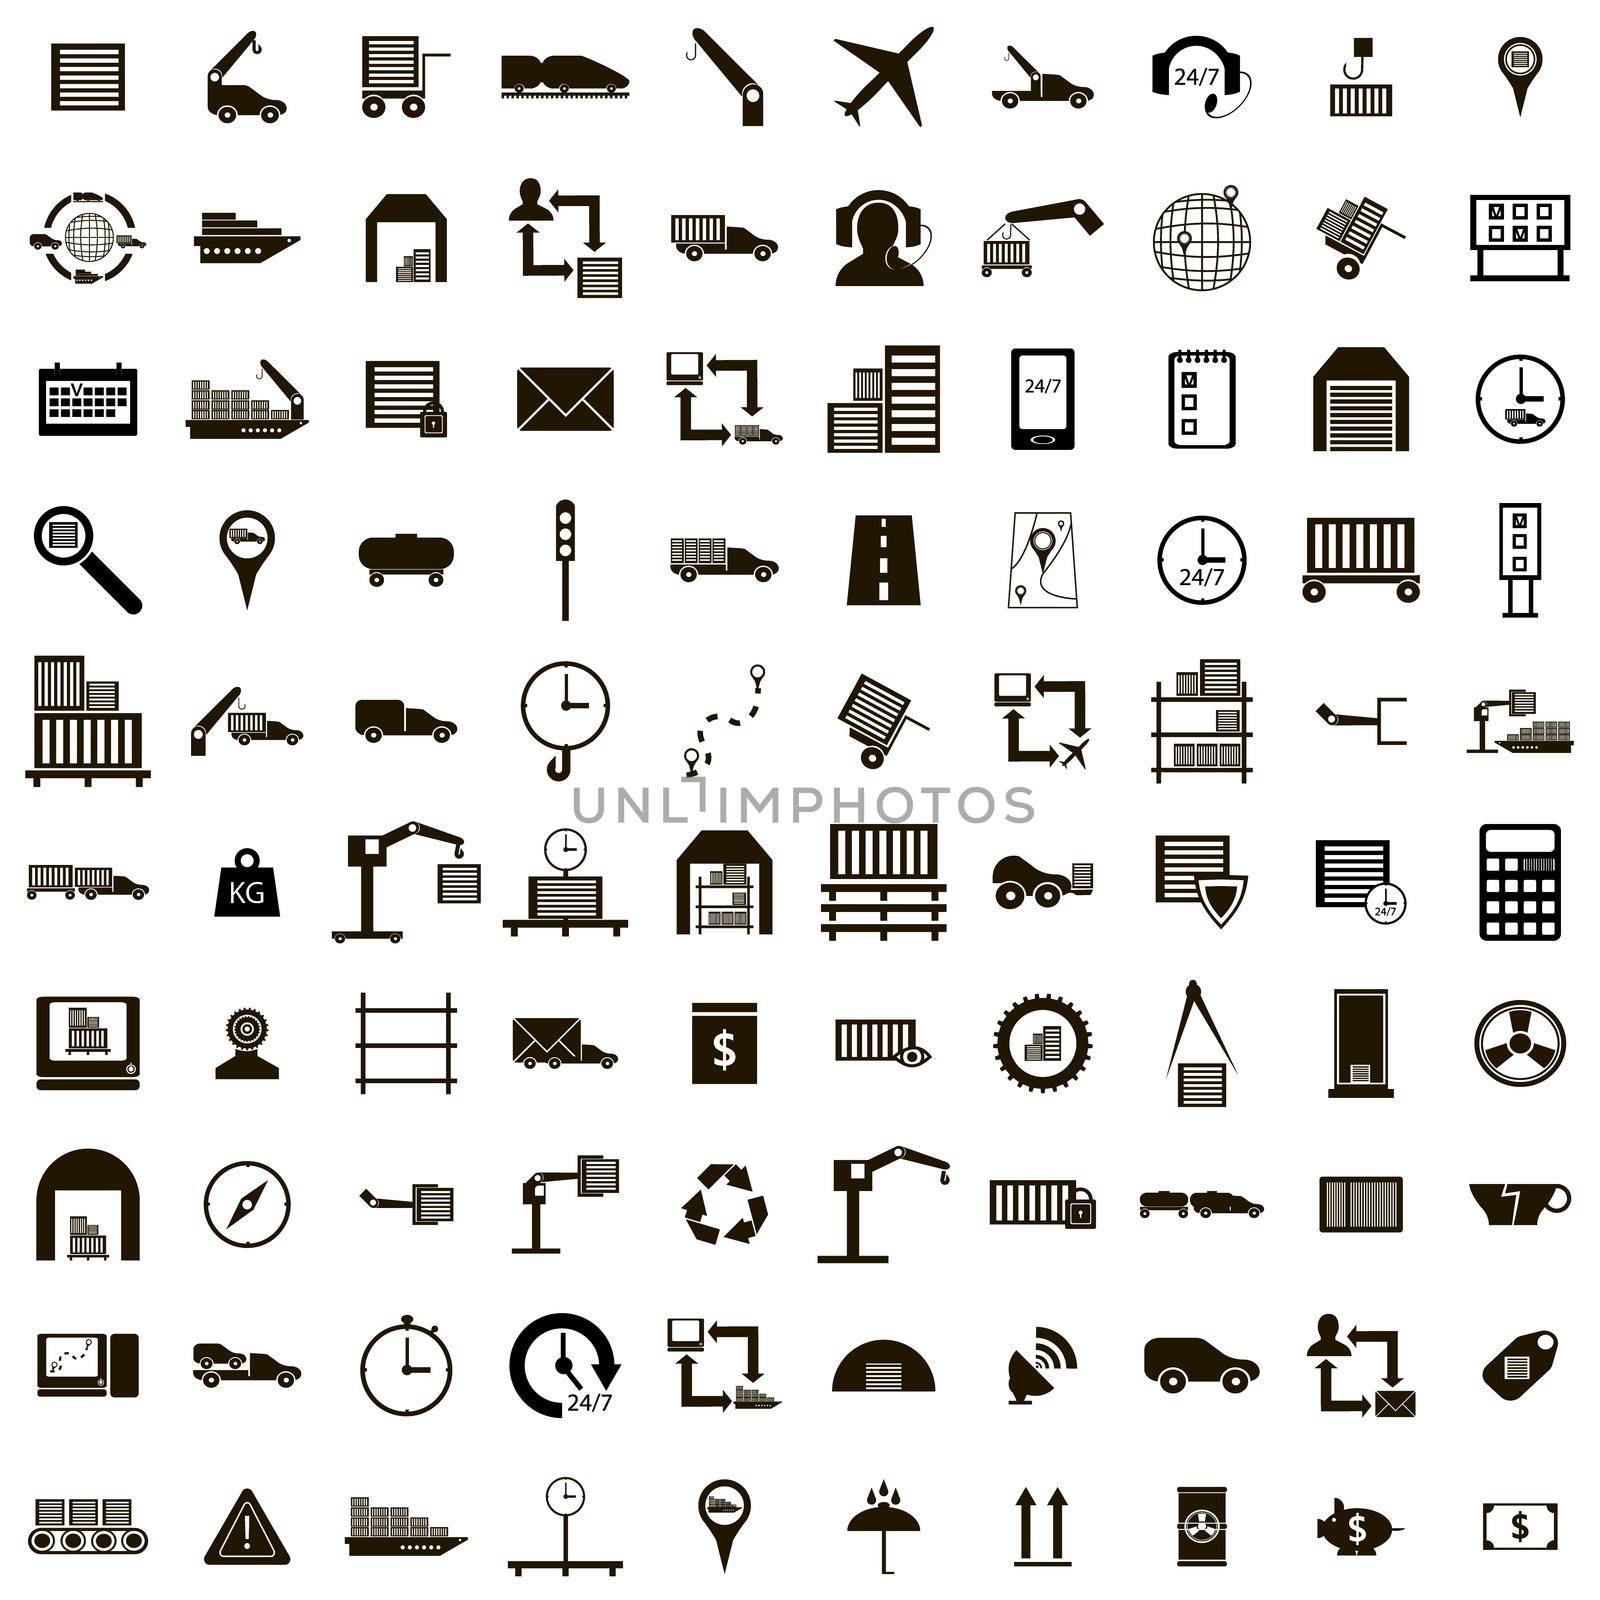 100 Logistics icons set in simple style isolated on white